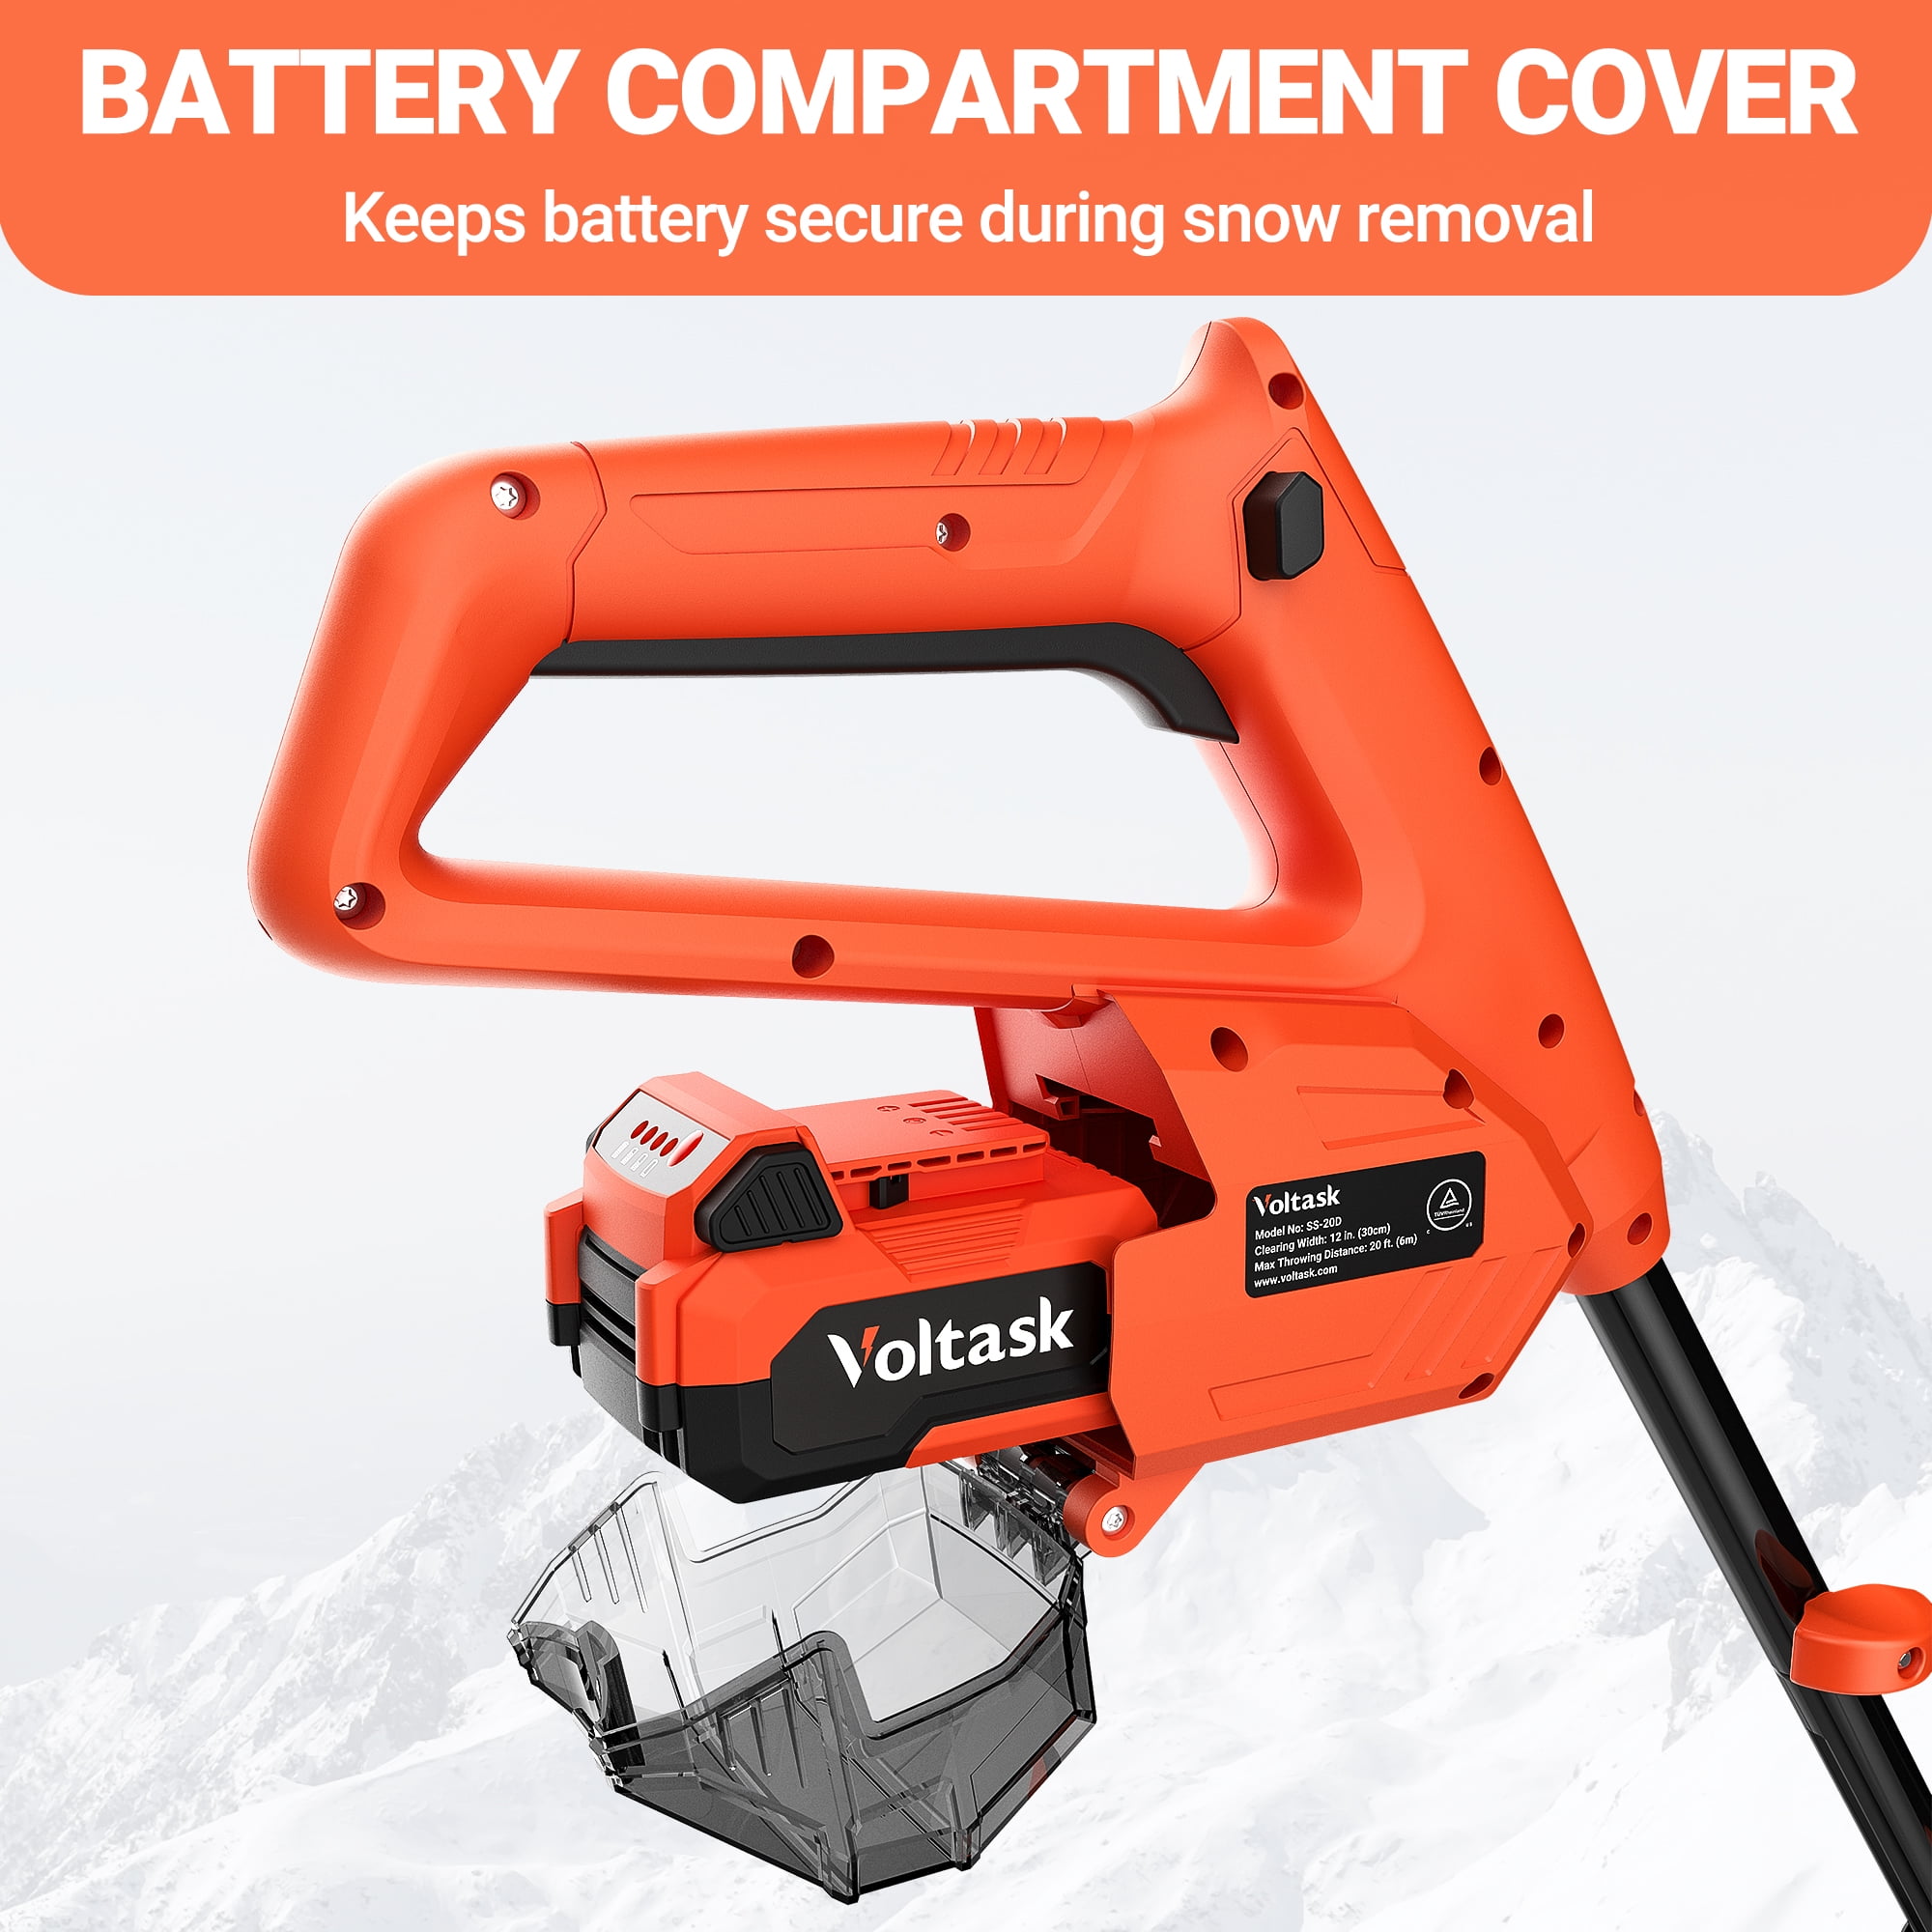 Voltask Detachable LED Light Compatible with Any Cordless Snow Shovel and Cordless Snow Blower, 4V Lithium Battery Powered, Enhance Visibility for